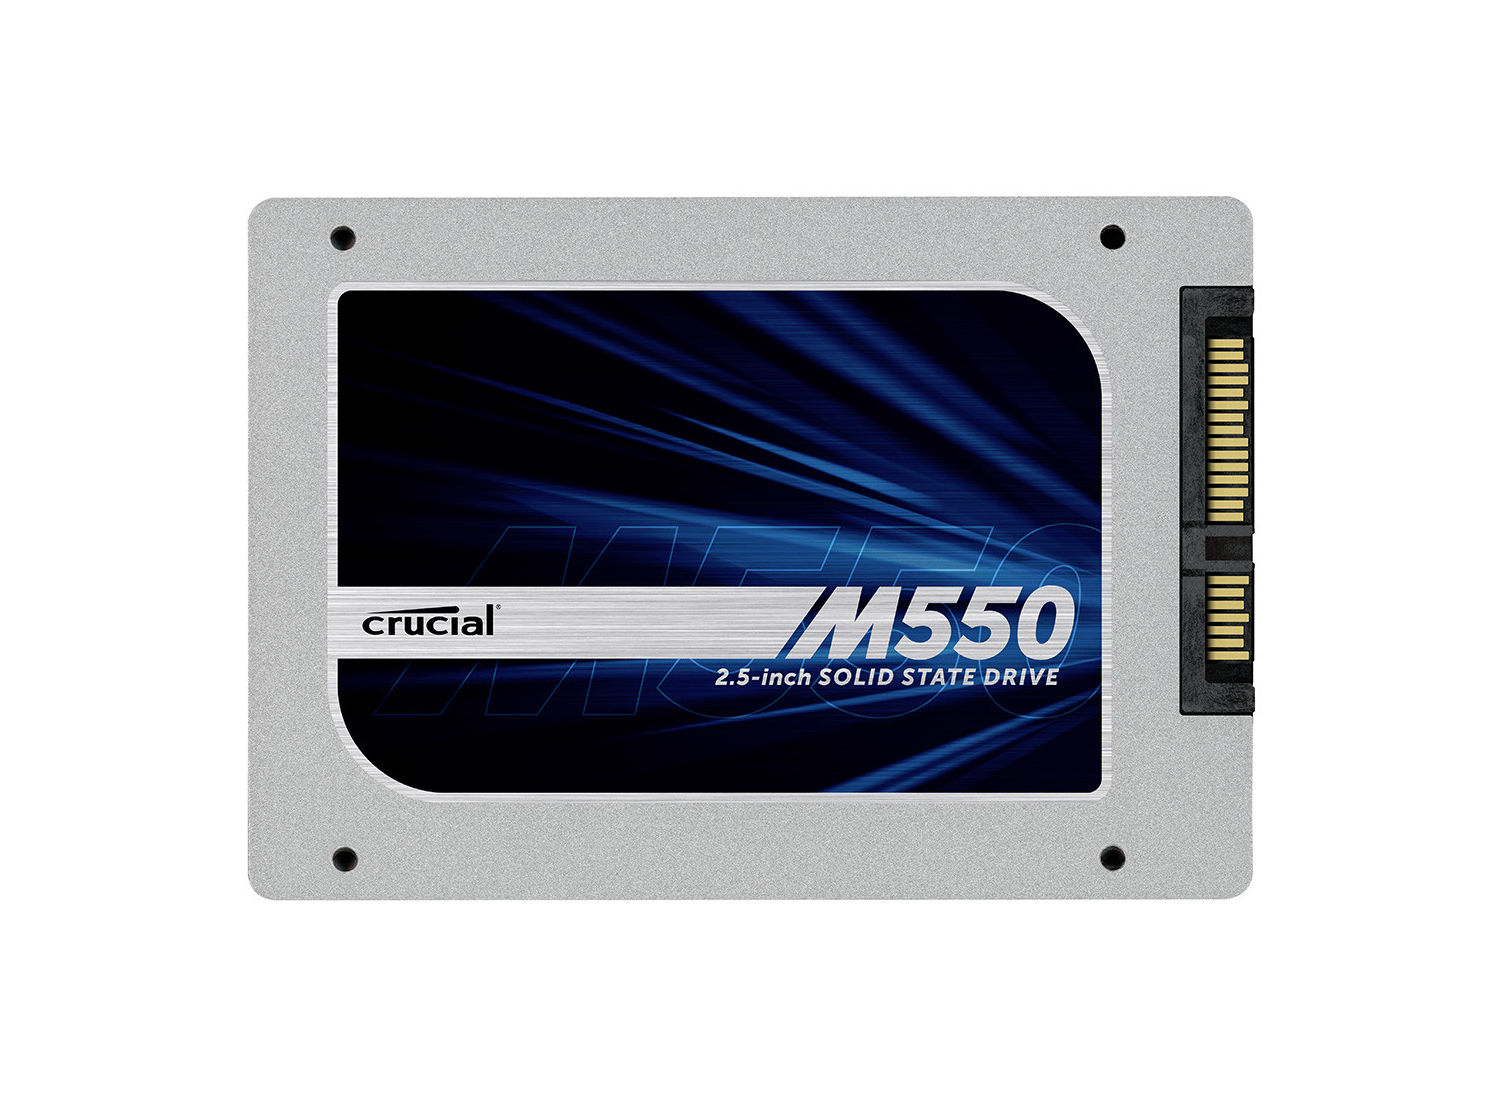 Media asset in full size related to 3dfxzone.it news item entitled as follows: Crucial commercializza la linea di drive SSD da 2.5-inch M550 | Image Name: news20928_Crucial-M550-SSD_1.jpg